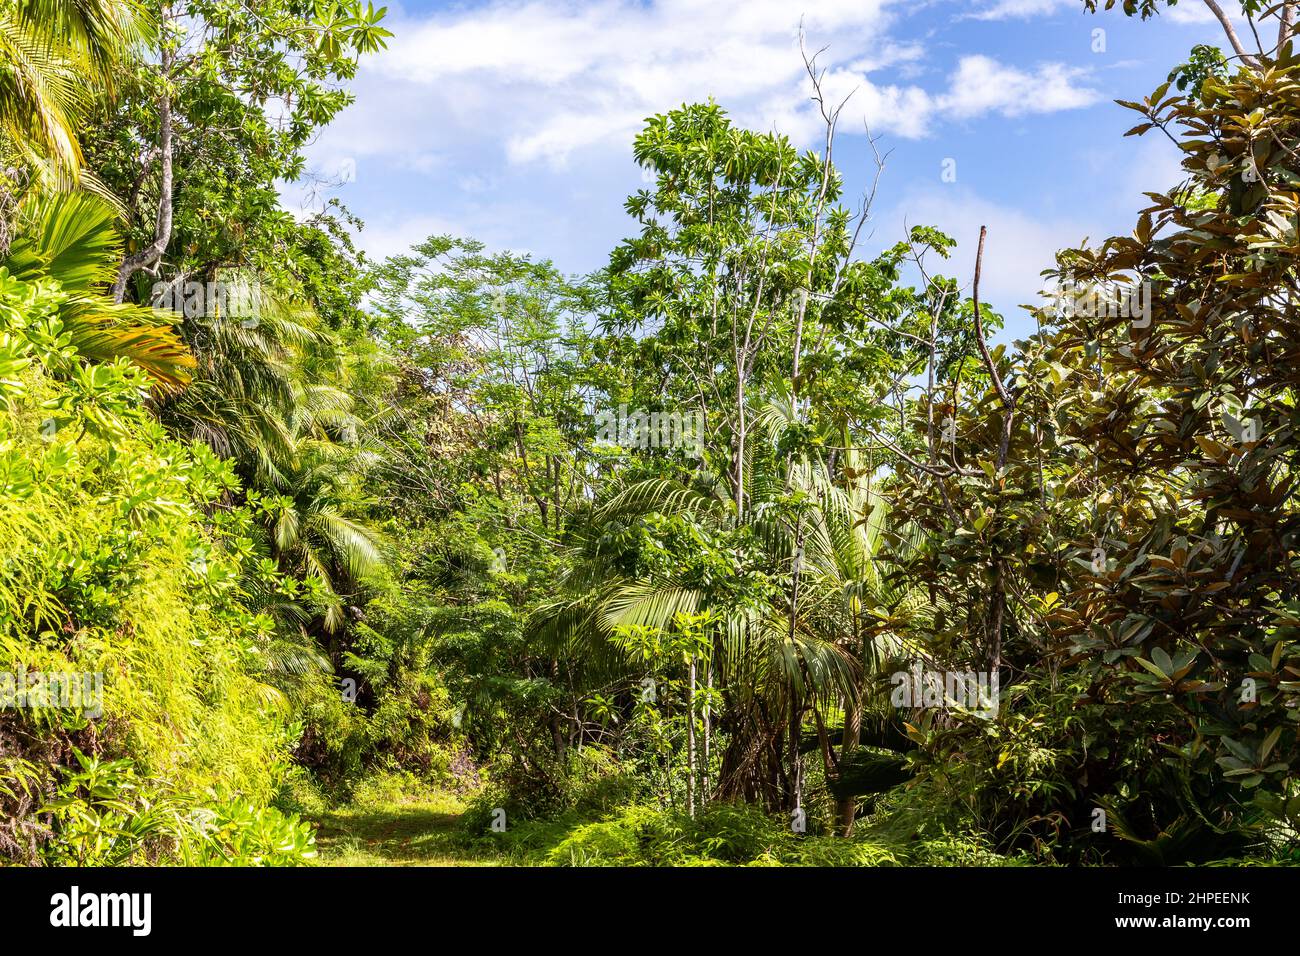 Lush tropical vegetation with endemic palm trees at Glacis Noire nature trail leading to the highest peak of Praslin Island - Mont Azore. Seychelles. Stock Photo